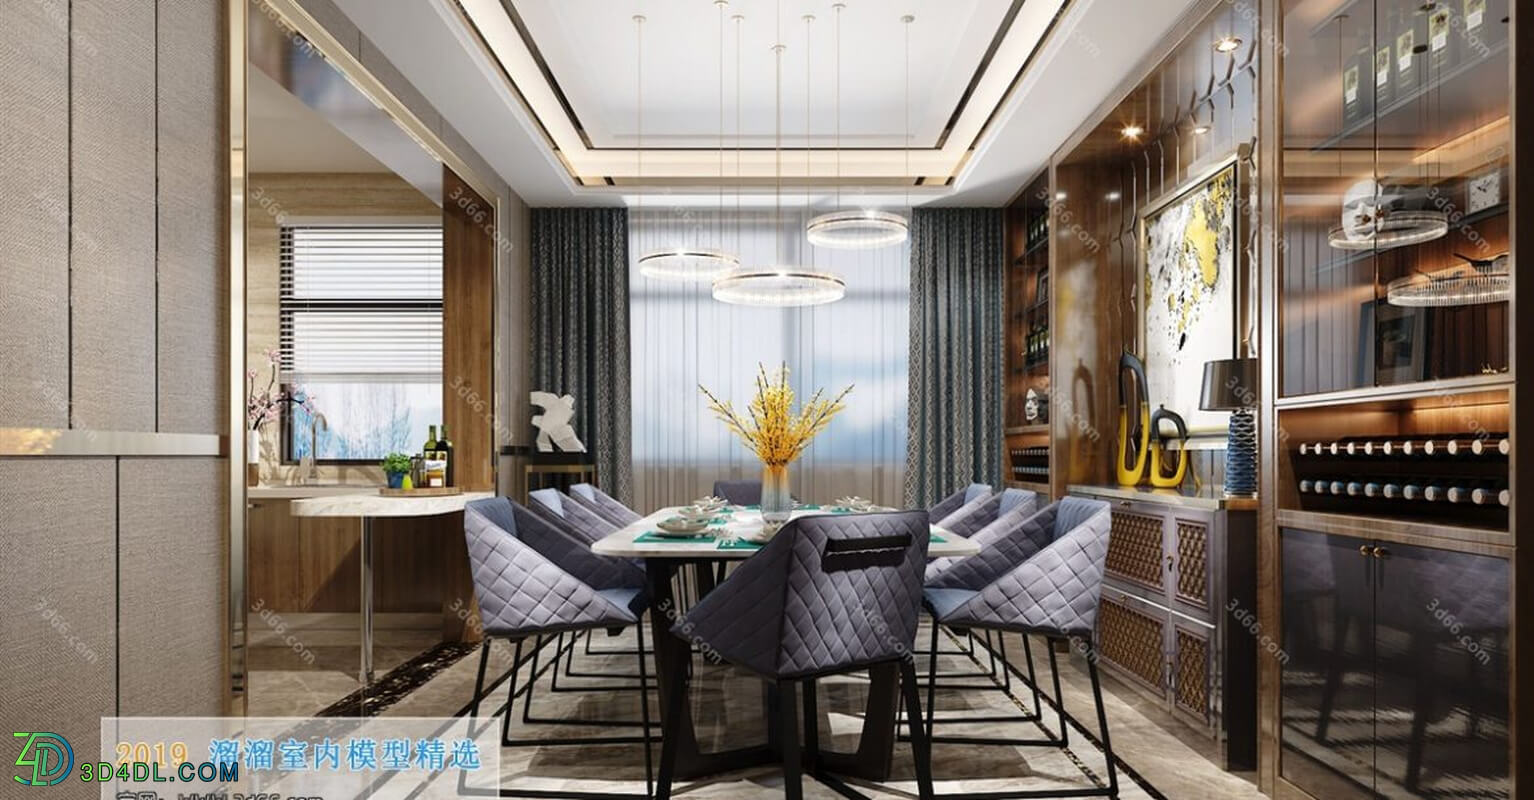 3D66 2019 Dining Room & Kitchen (005)